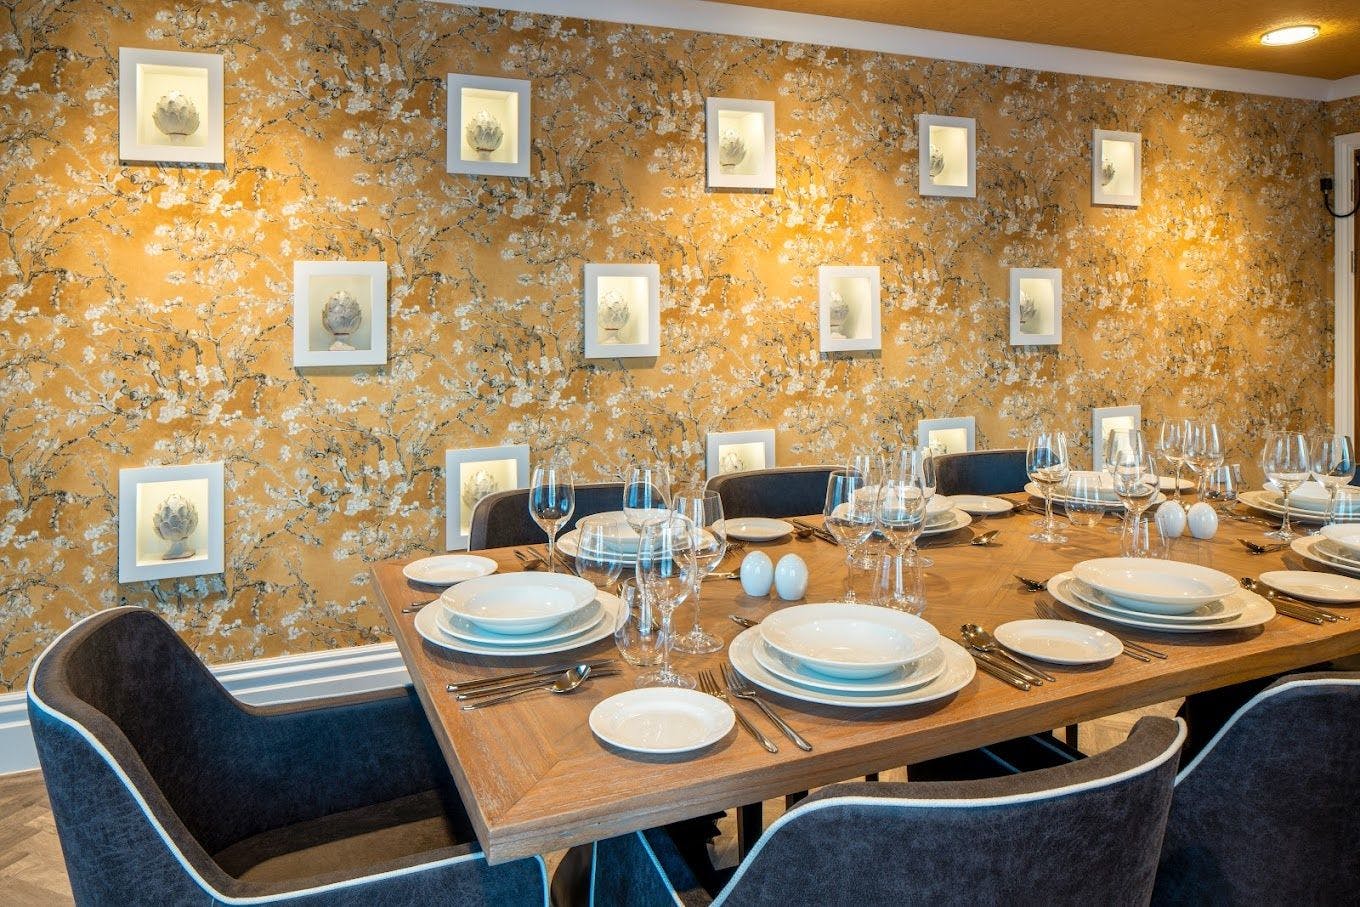 Private Dining Room at Cavell Park Care Home in Maidstone, Kent